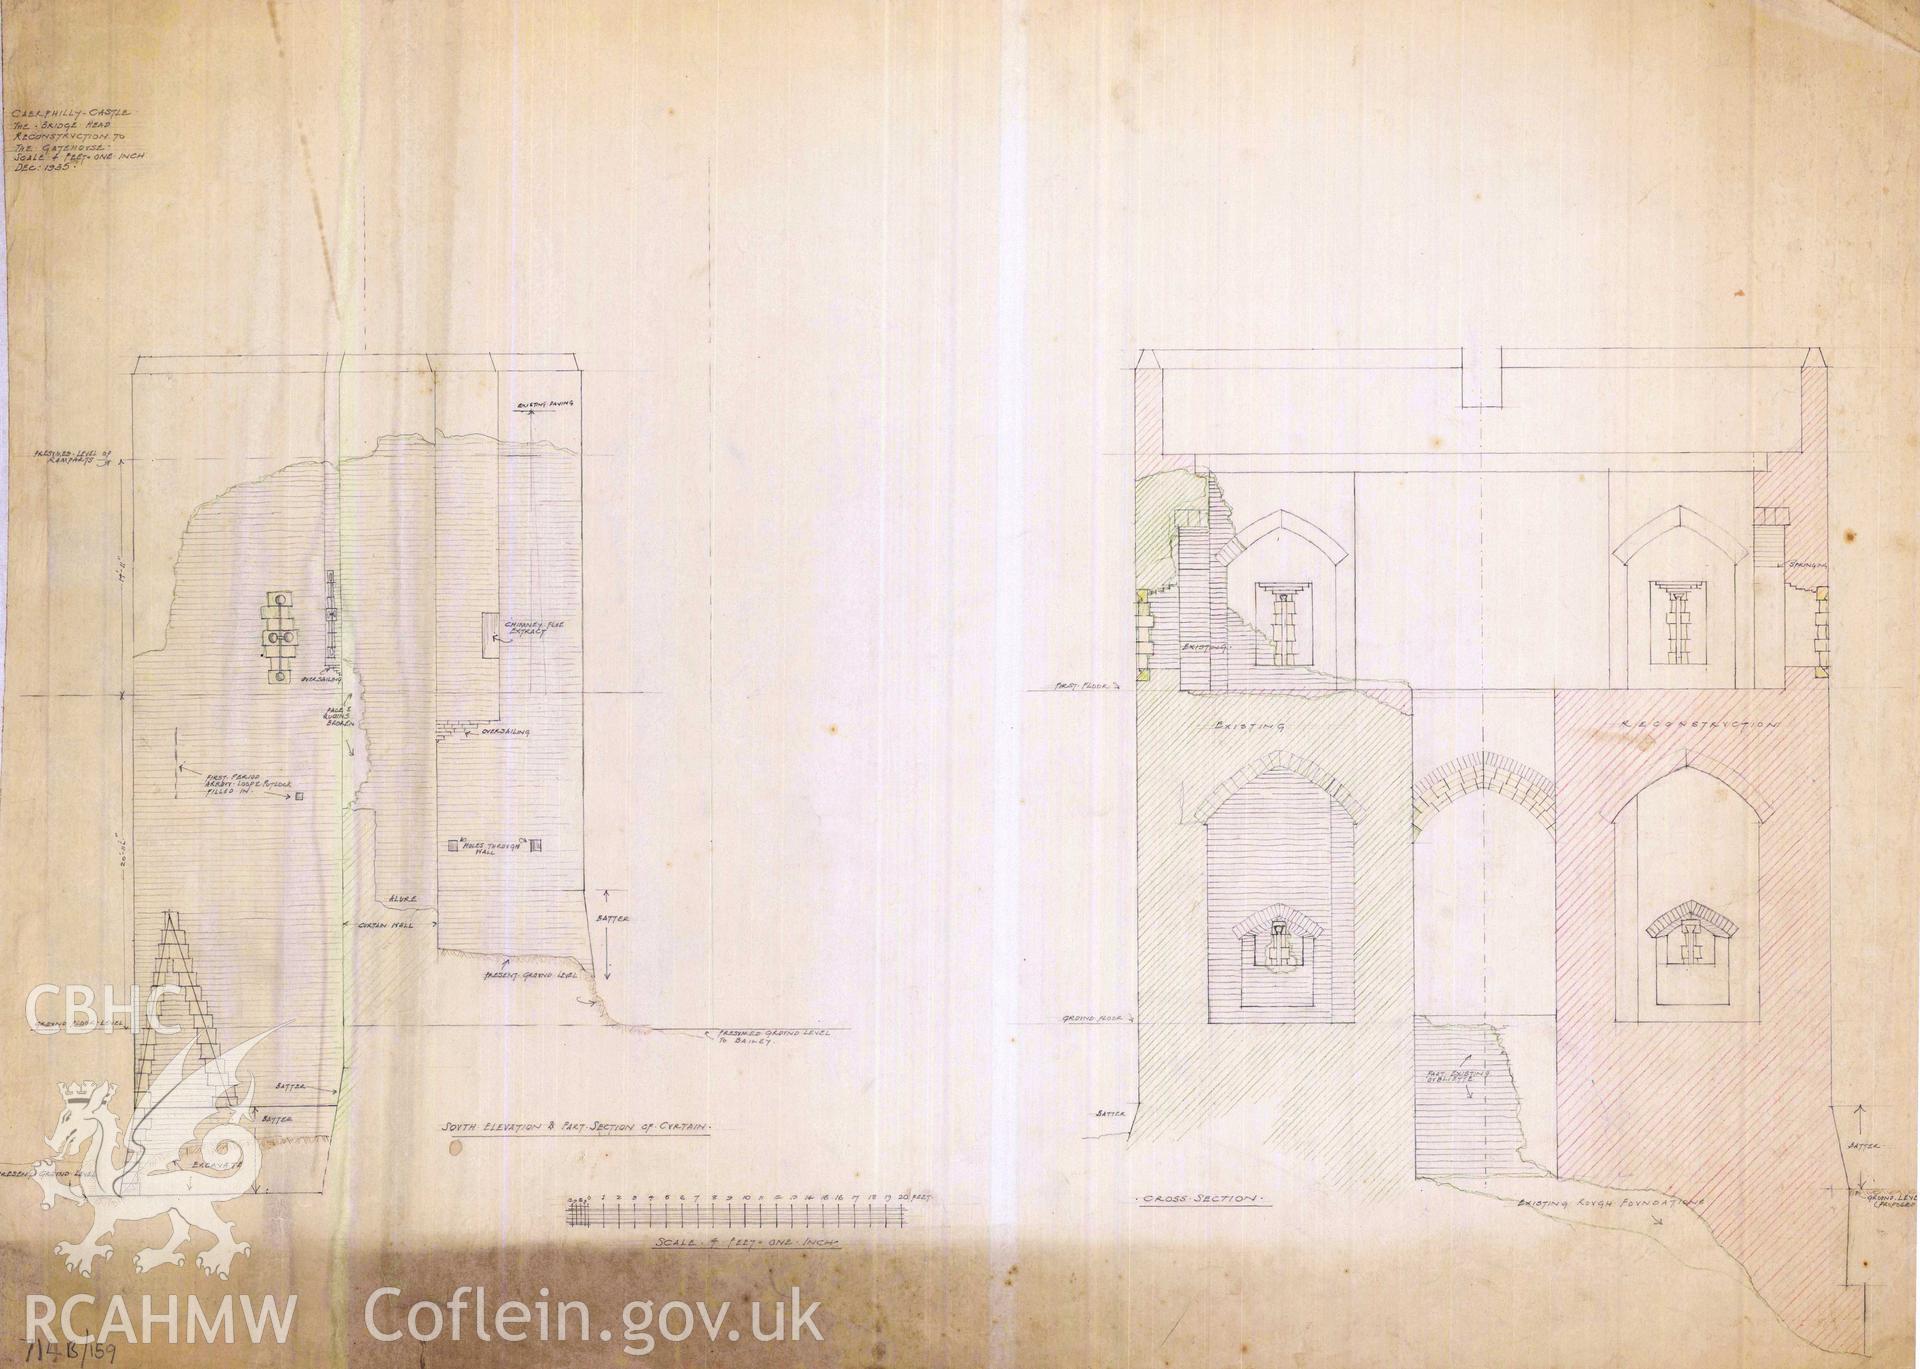 Cadw guardianship monument drawing of Caerphilly Castle. Dam, S gate, sections, recons. Cadw Ref. No:714B/159. Scale 1:48.